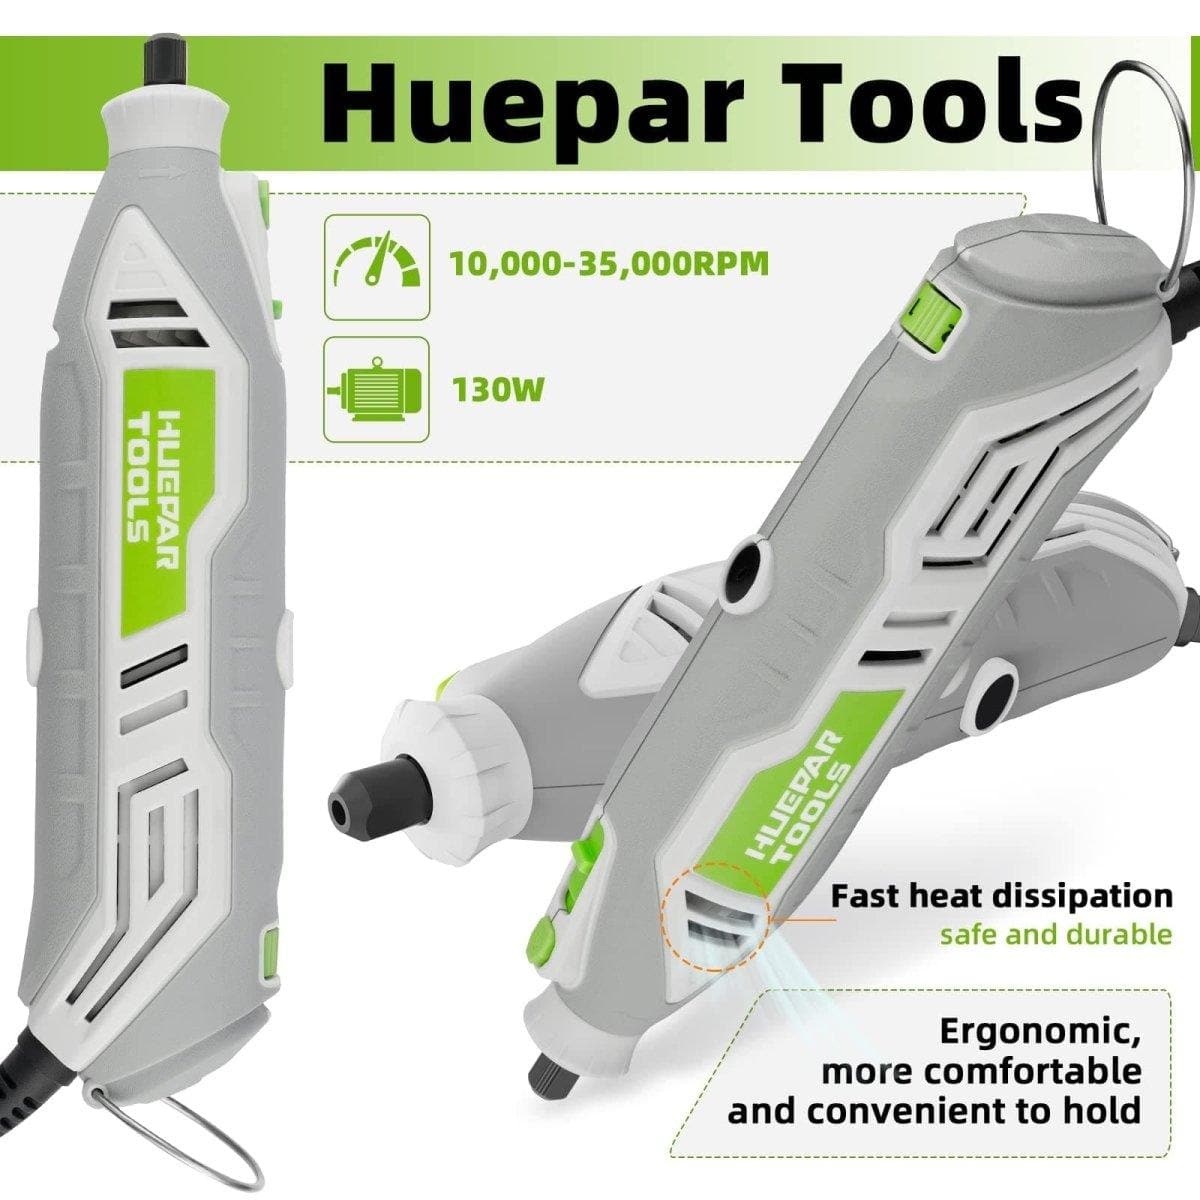 Huepar RT130 Rotary Tool Kit with Flex Shaft, 235pcs Accessories, MultiPro Keyless Chuck, and 6 Variable Speeds ranging from 10000-35000RPM for Crafting and DIY Projects3